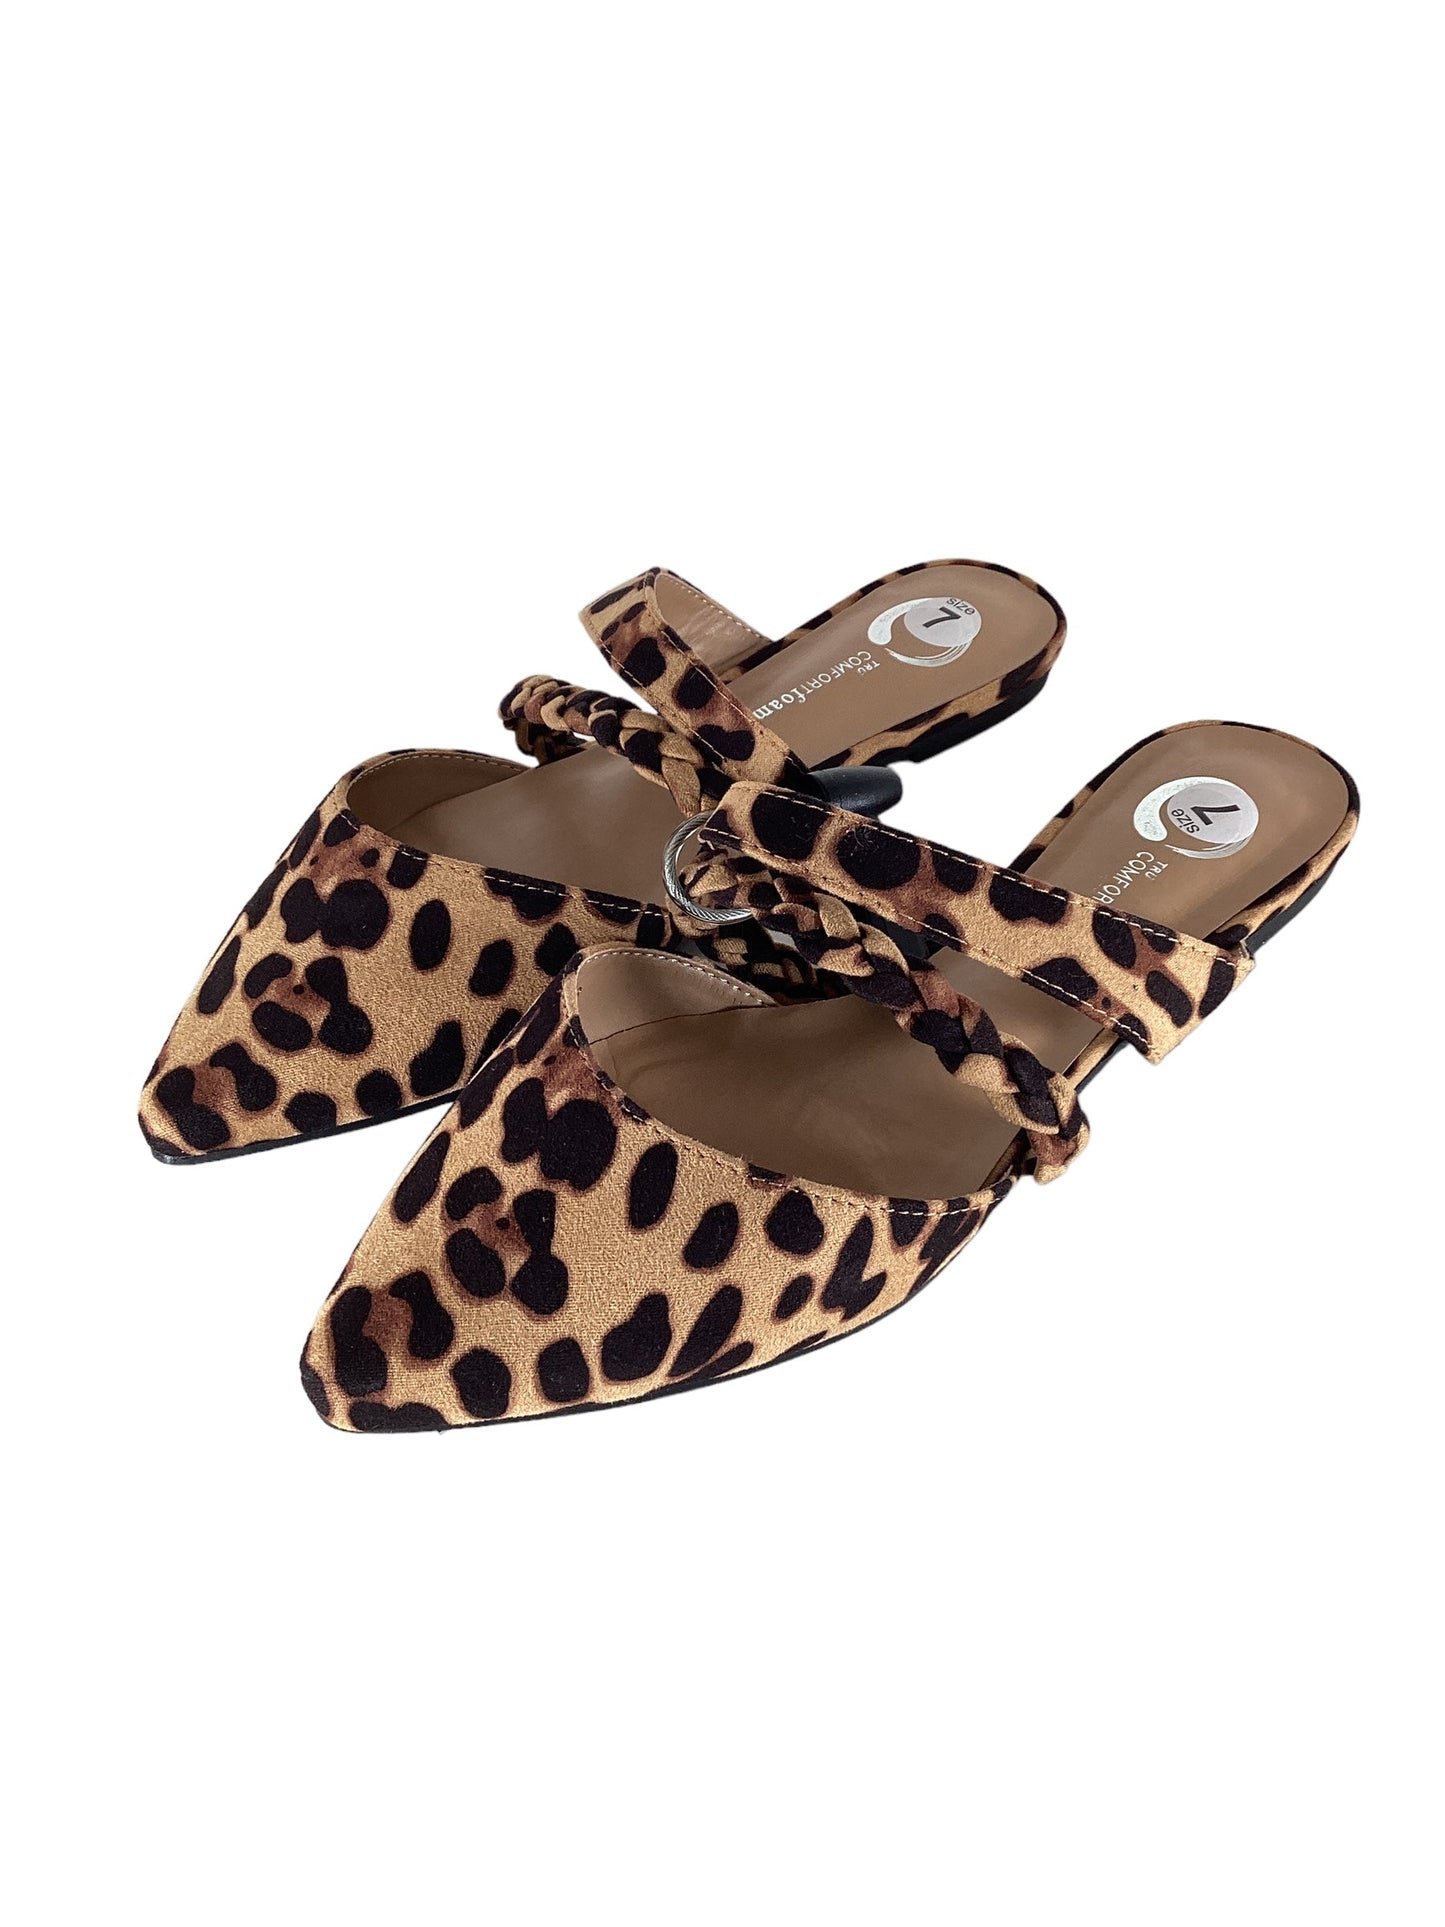 Shoes Flats By Cato  Size: 7